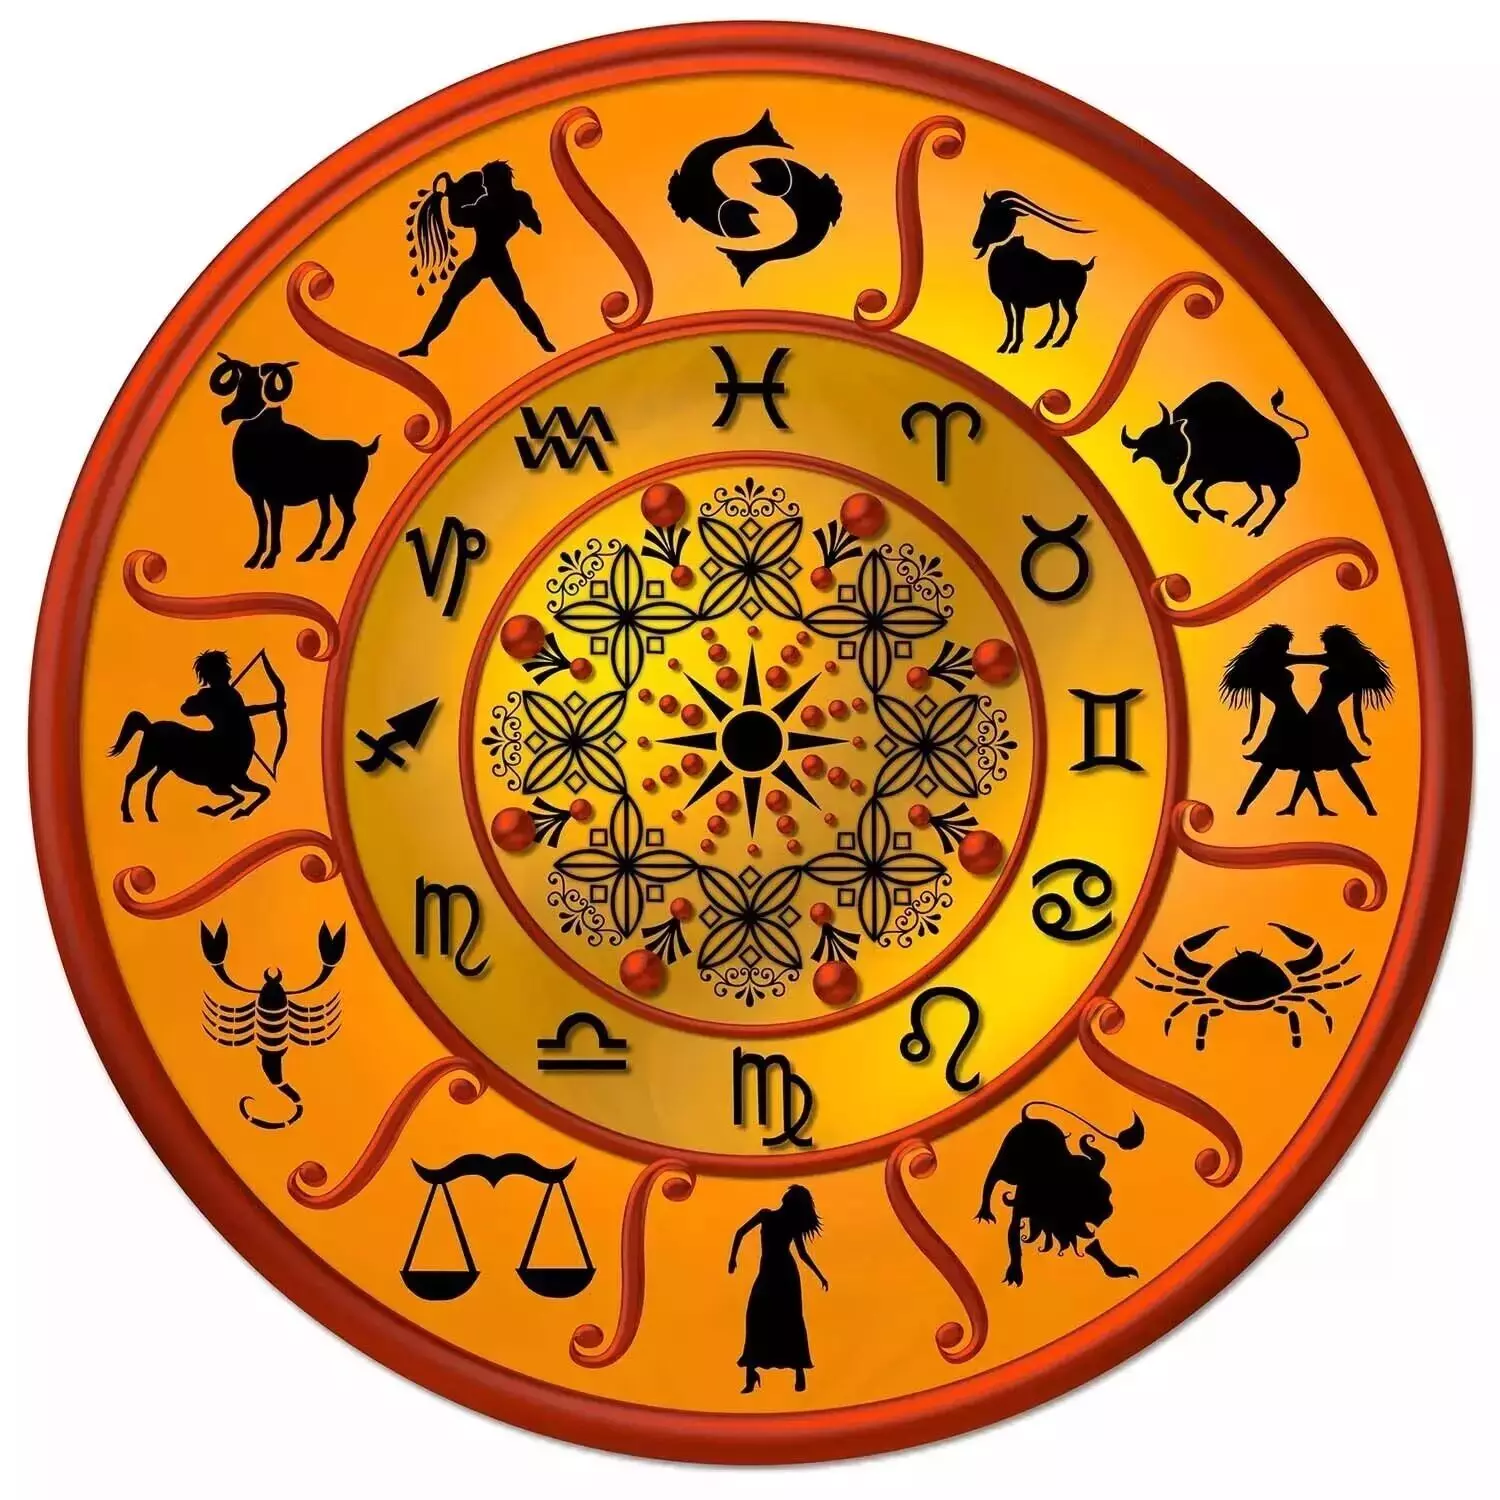 12 March – Know your todays horoscope